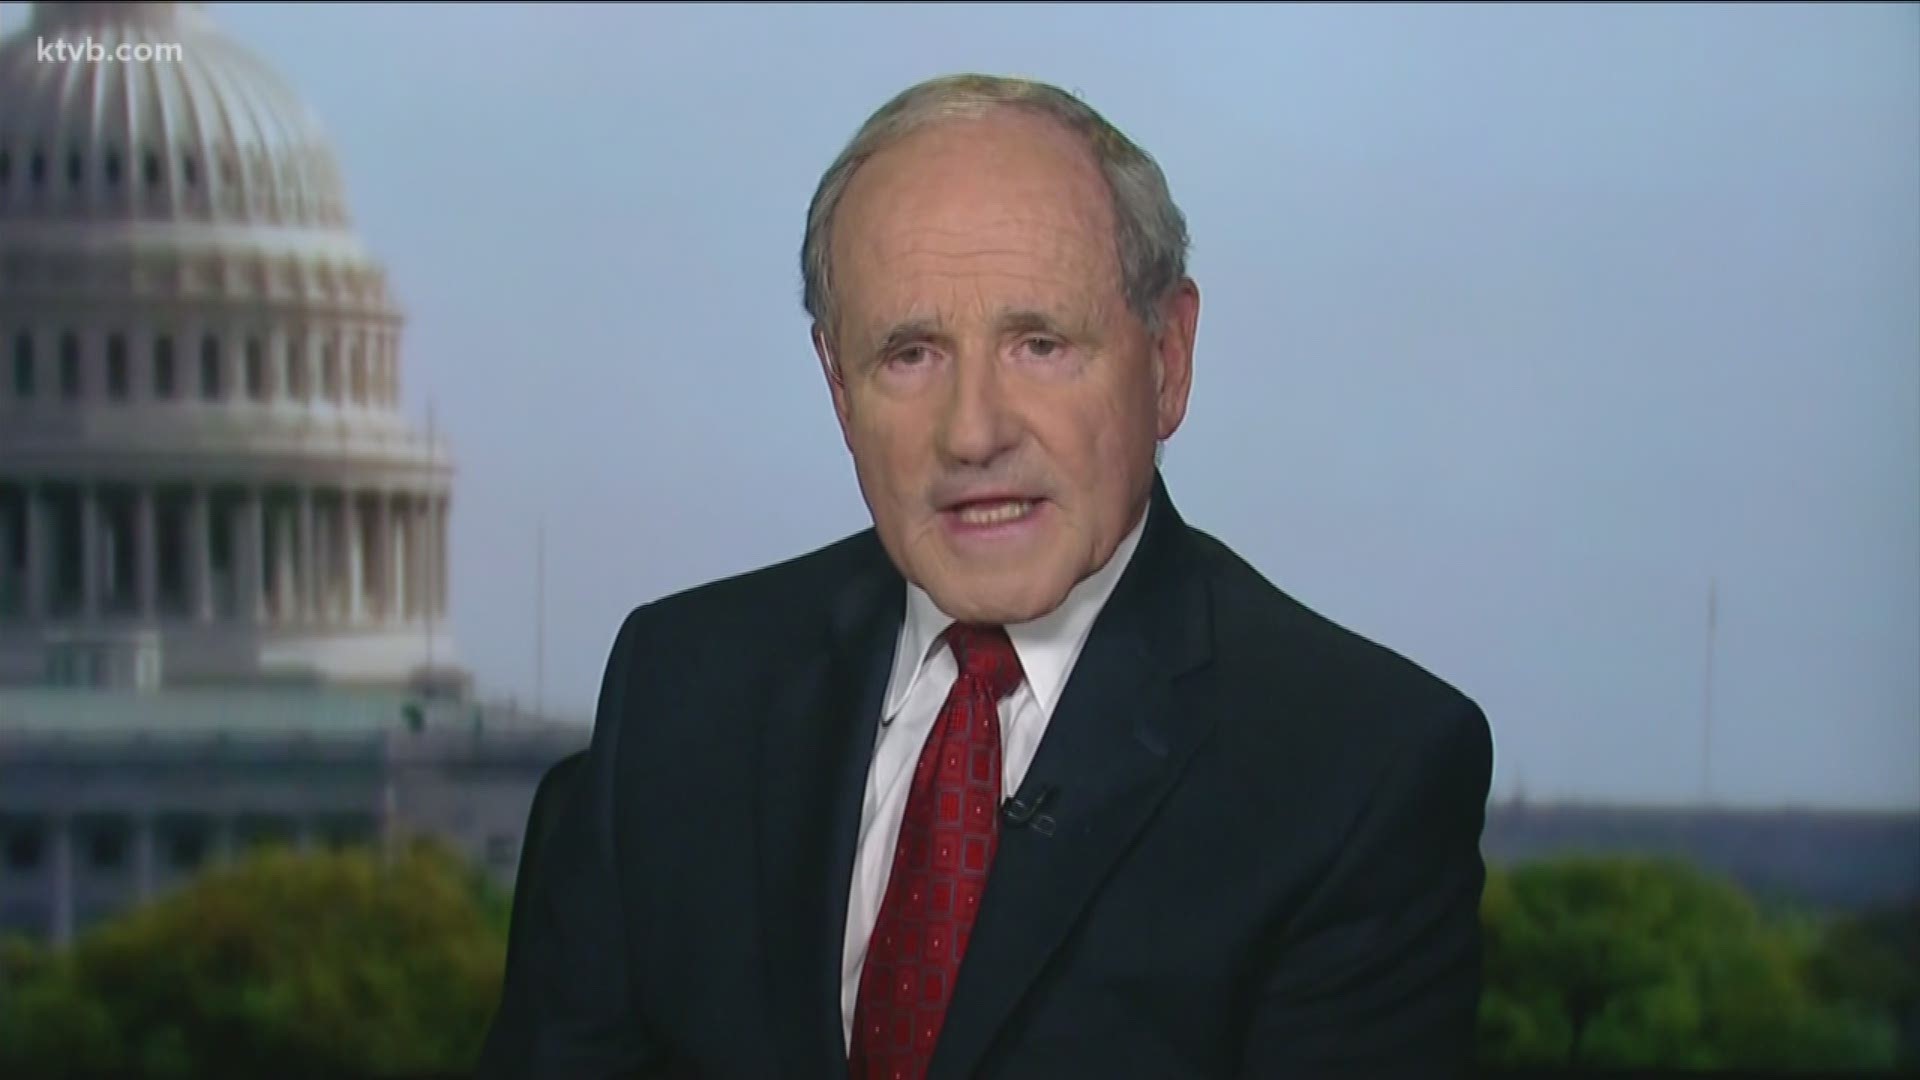 Risch told KTVB that he did not think the president did anything wrong.